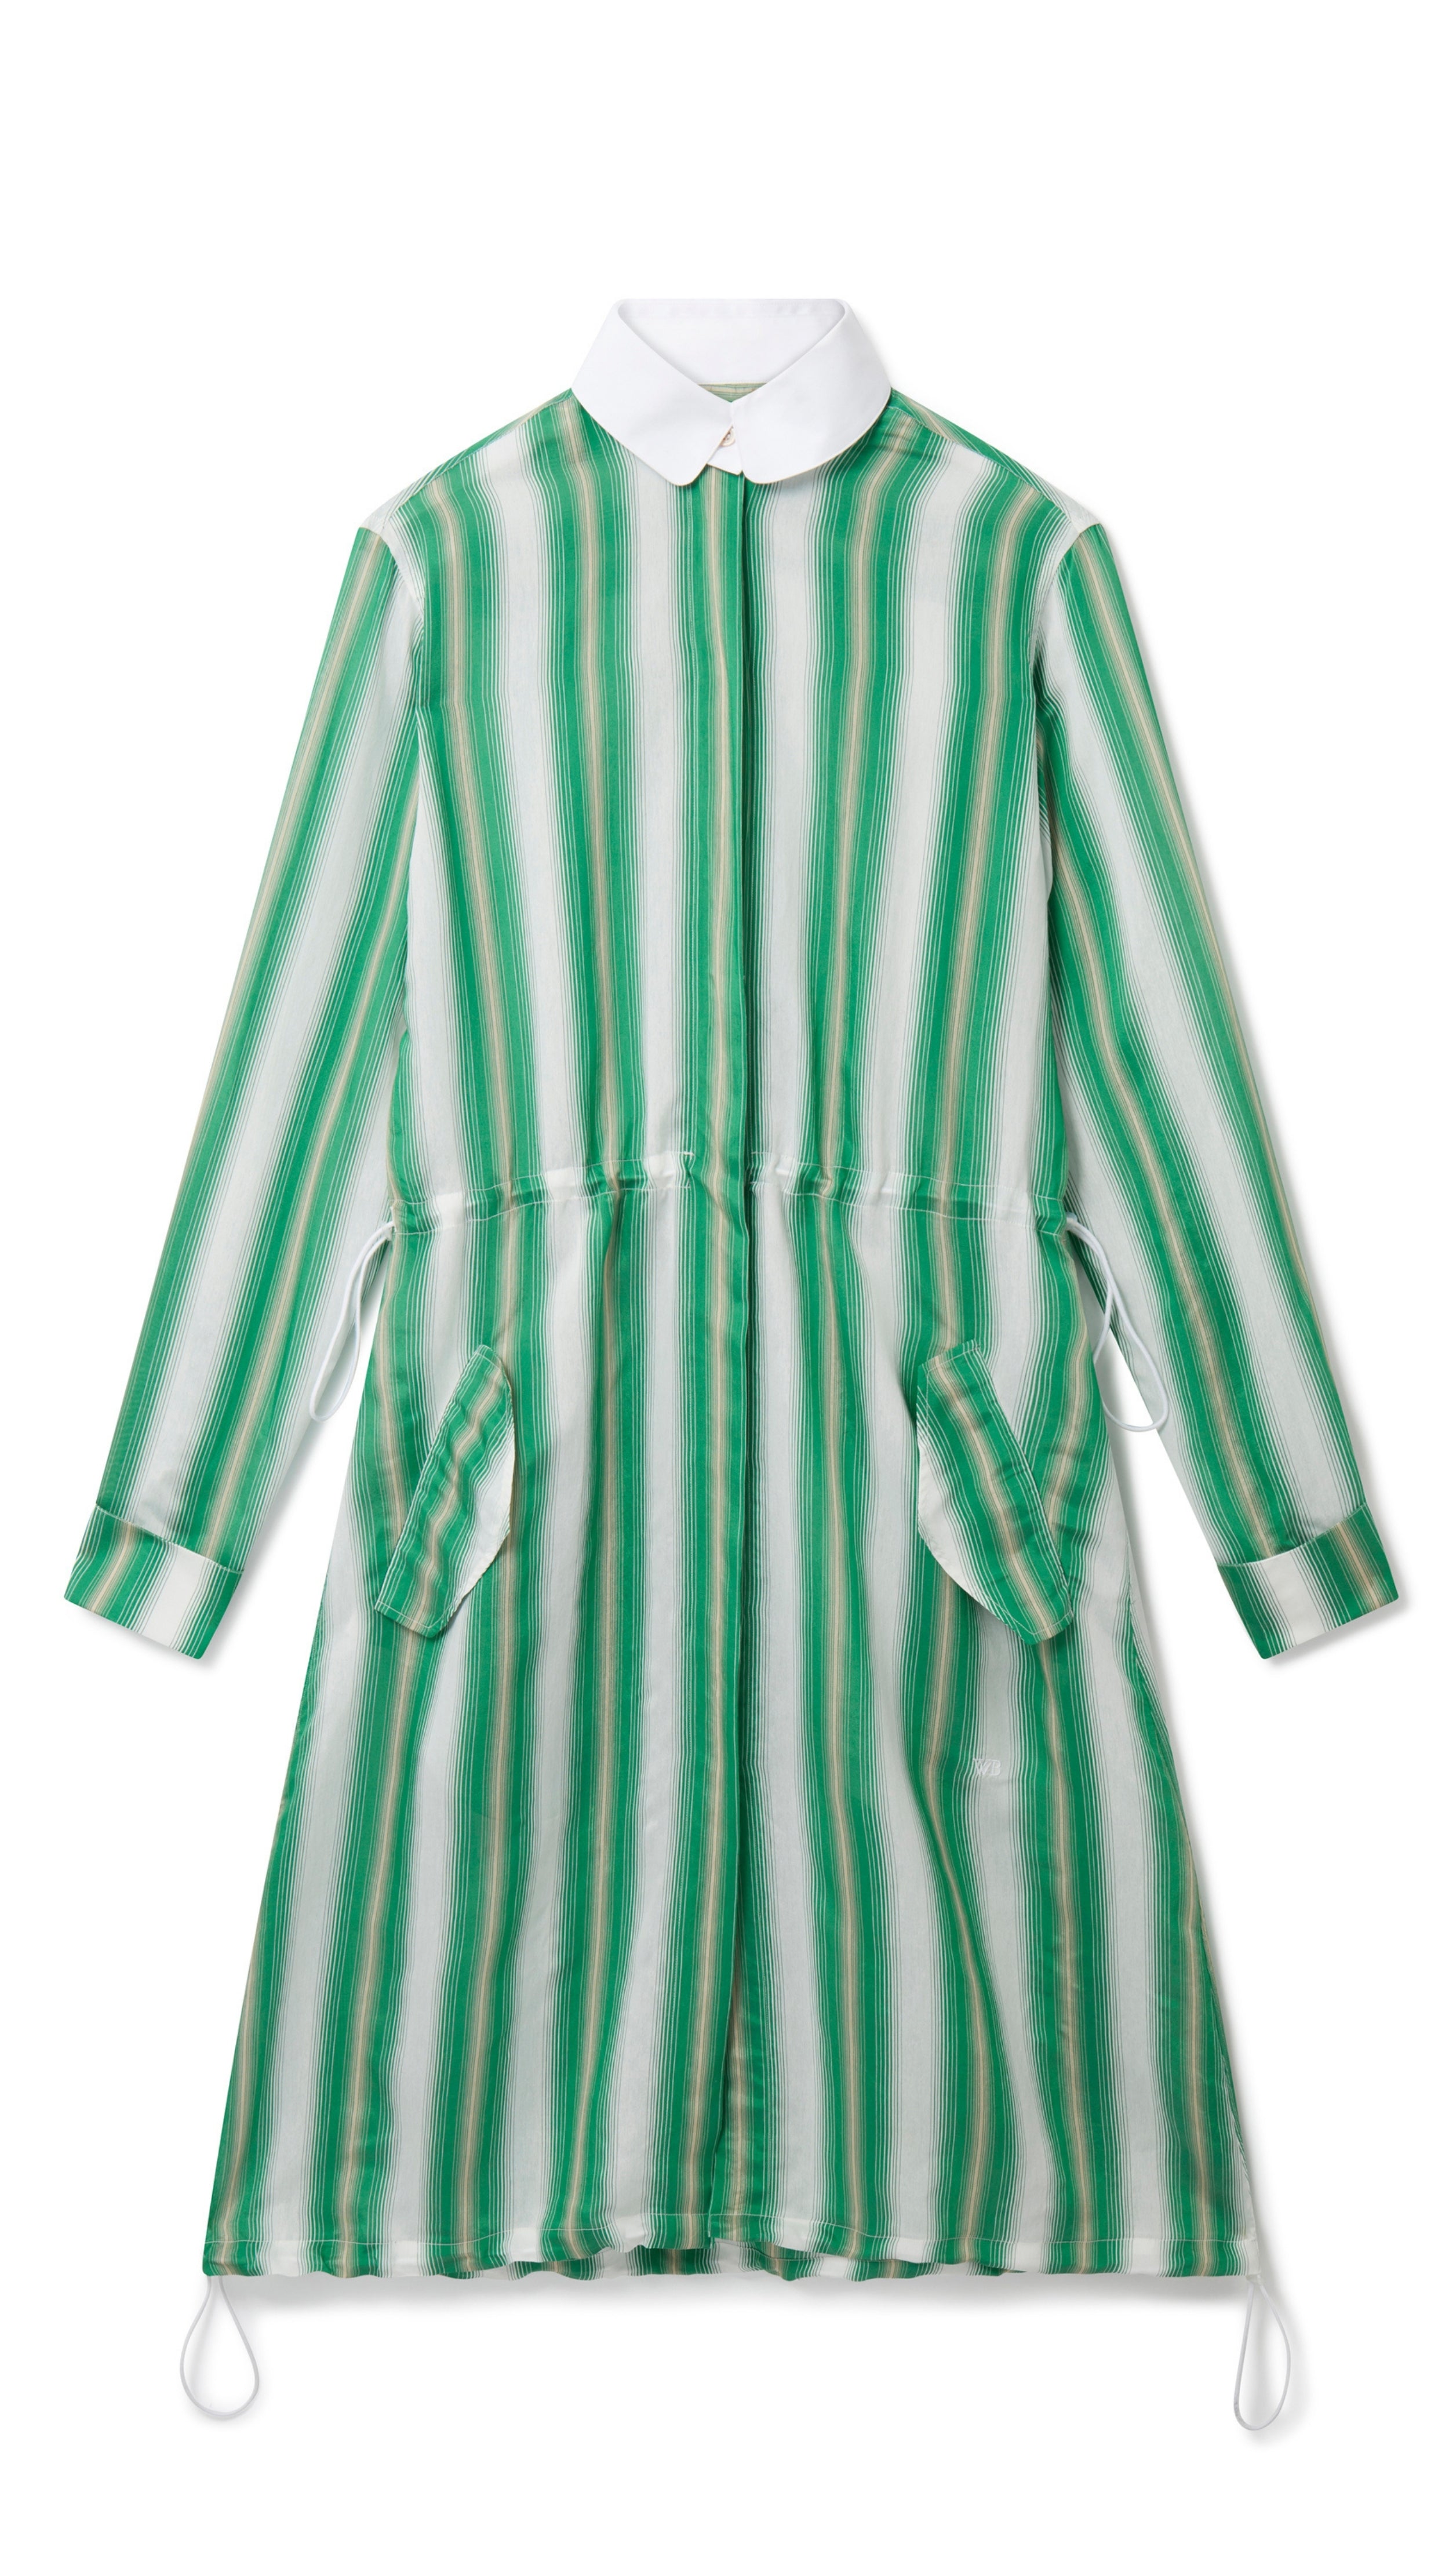 Wales Bonner Balance Dress Made in Italy in a lightweight silk blend. The midi dress has long sleeves, a white collared neck, and green and white stripes. The shirt dress has an adjustable drawstring waist, buttons up the front, and deep front pockets. Product photo shown from the front.